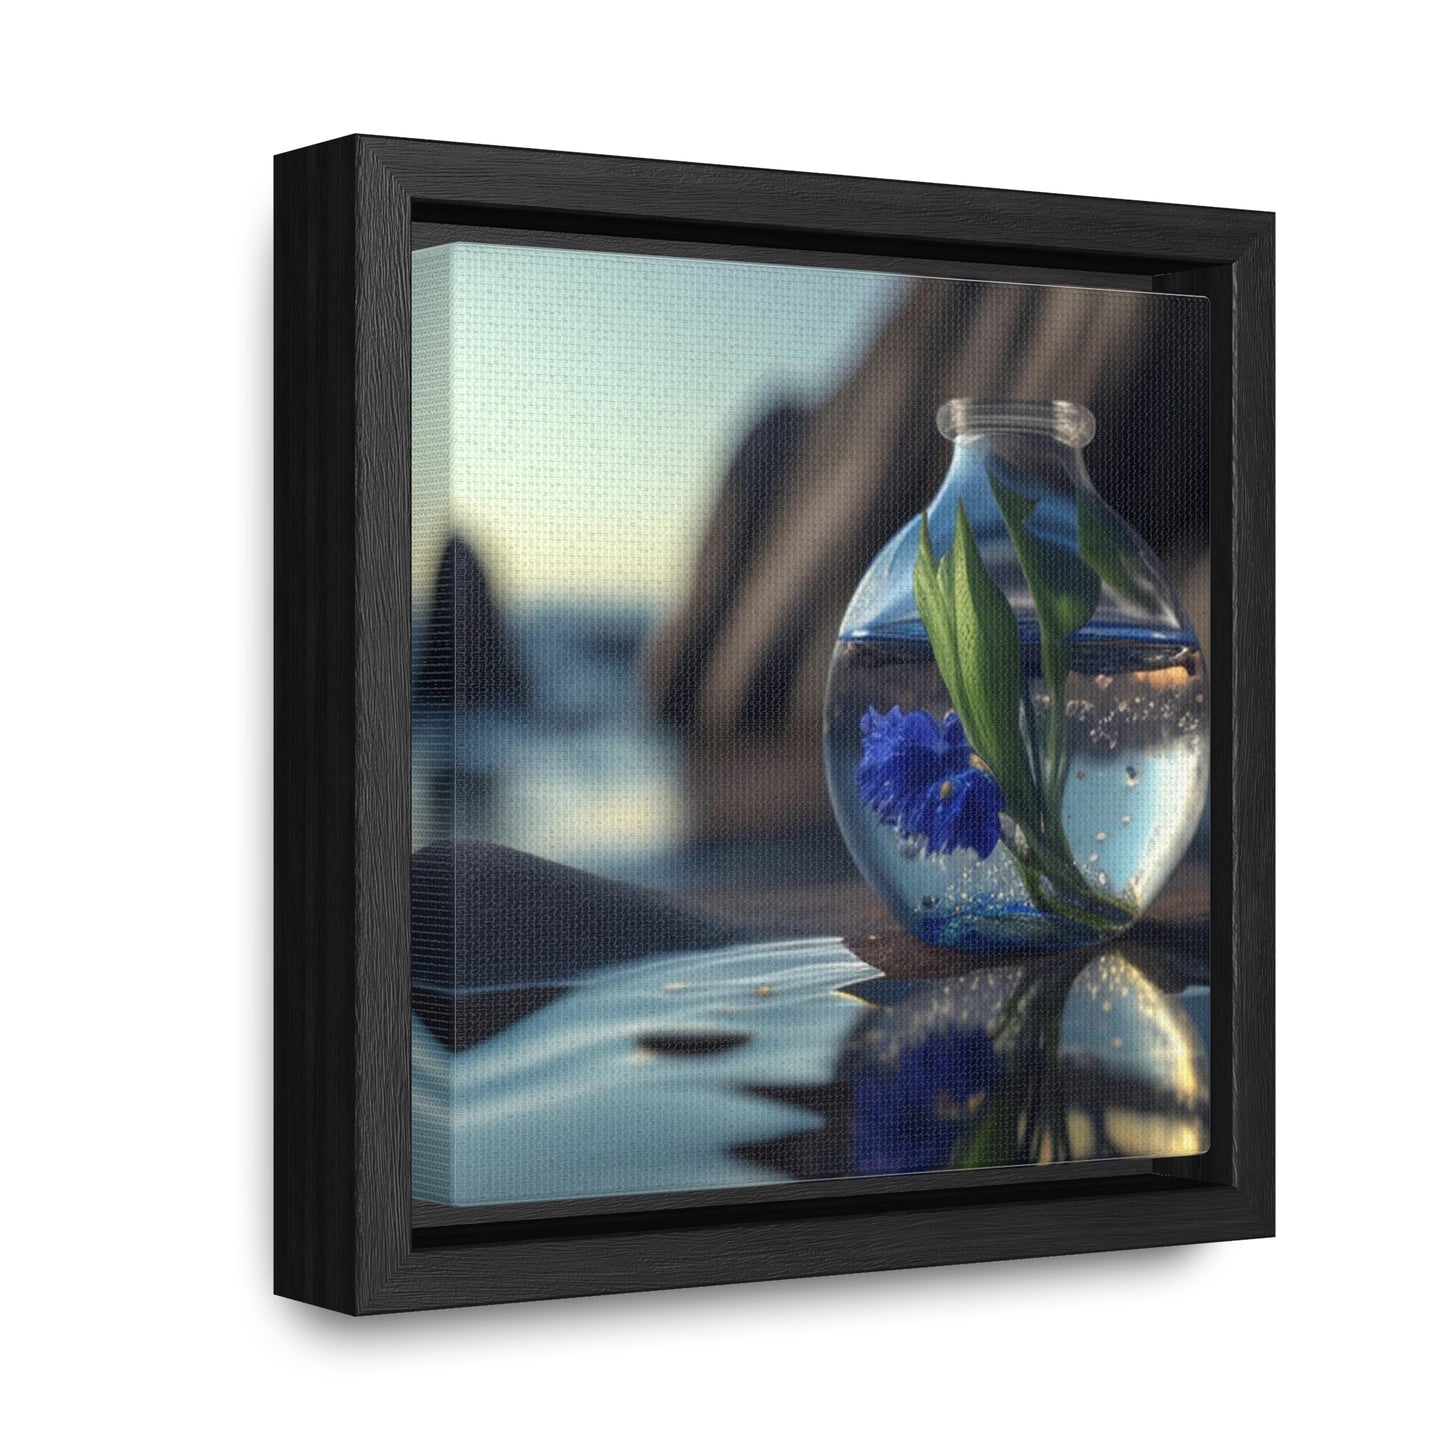 Gallery Canvas Wraps, Square Frame The Bluebell 3